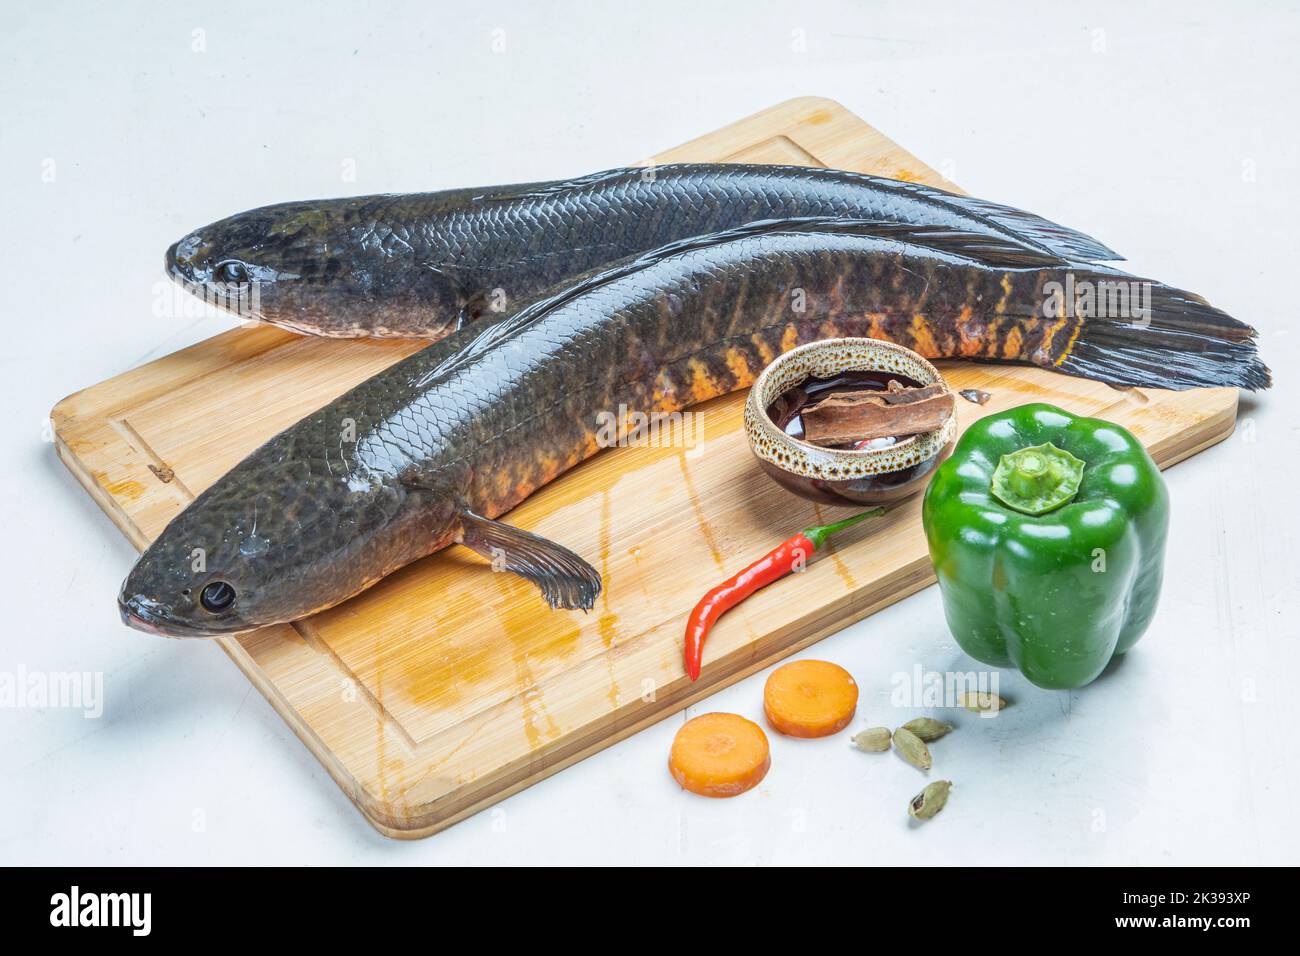 Telo Taki or Spotted snakehead, Channa punctata or Spotted snakehead that found in thousands of rivers and ponds Stock Photo